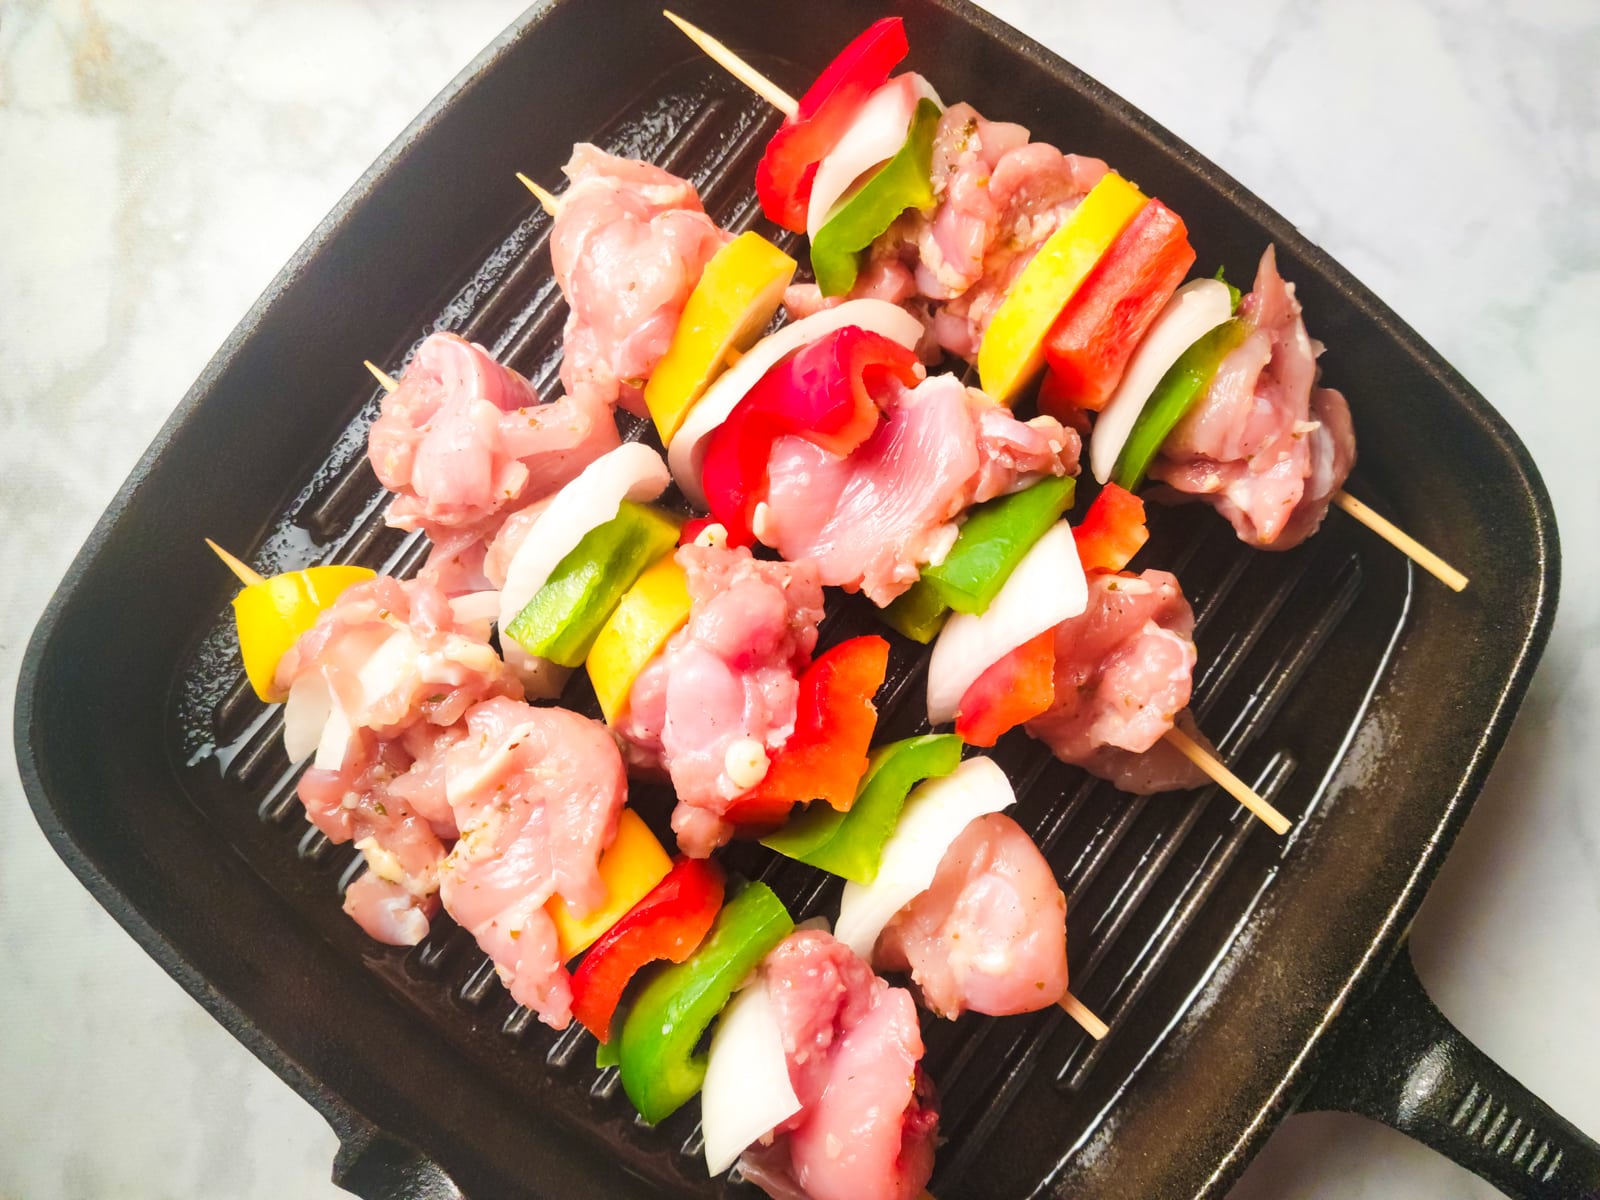 Brochetas de pollo sitting in a cast iron grill skillet, about to cook.